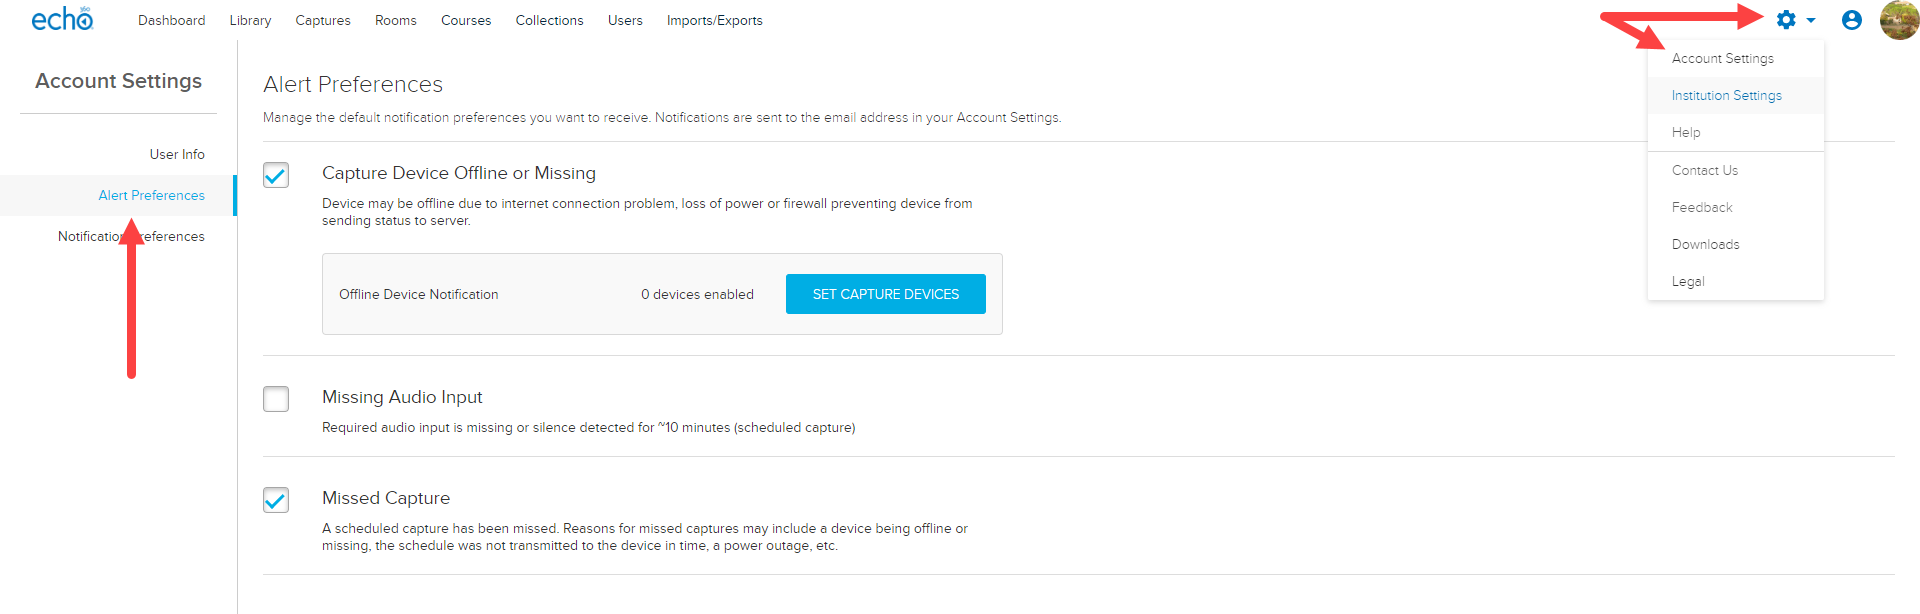 Admin account settings page with navigation and alert preferences identified